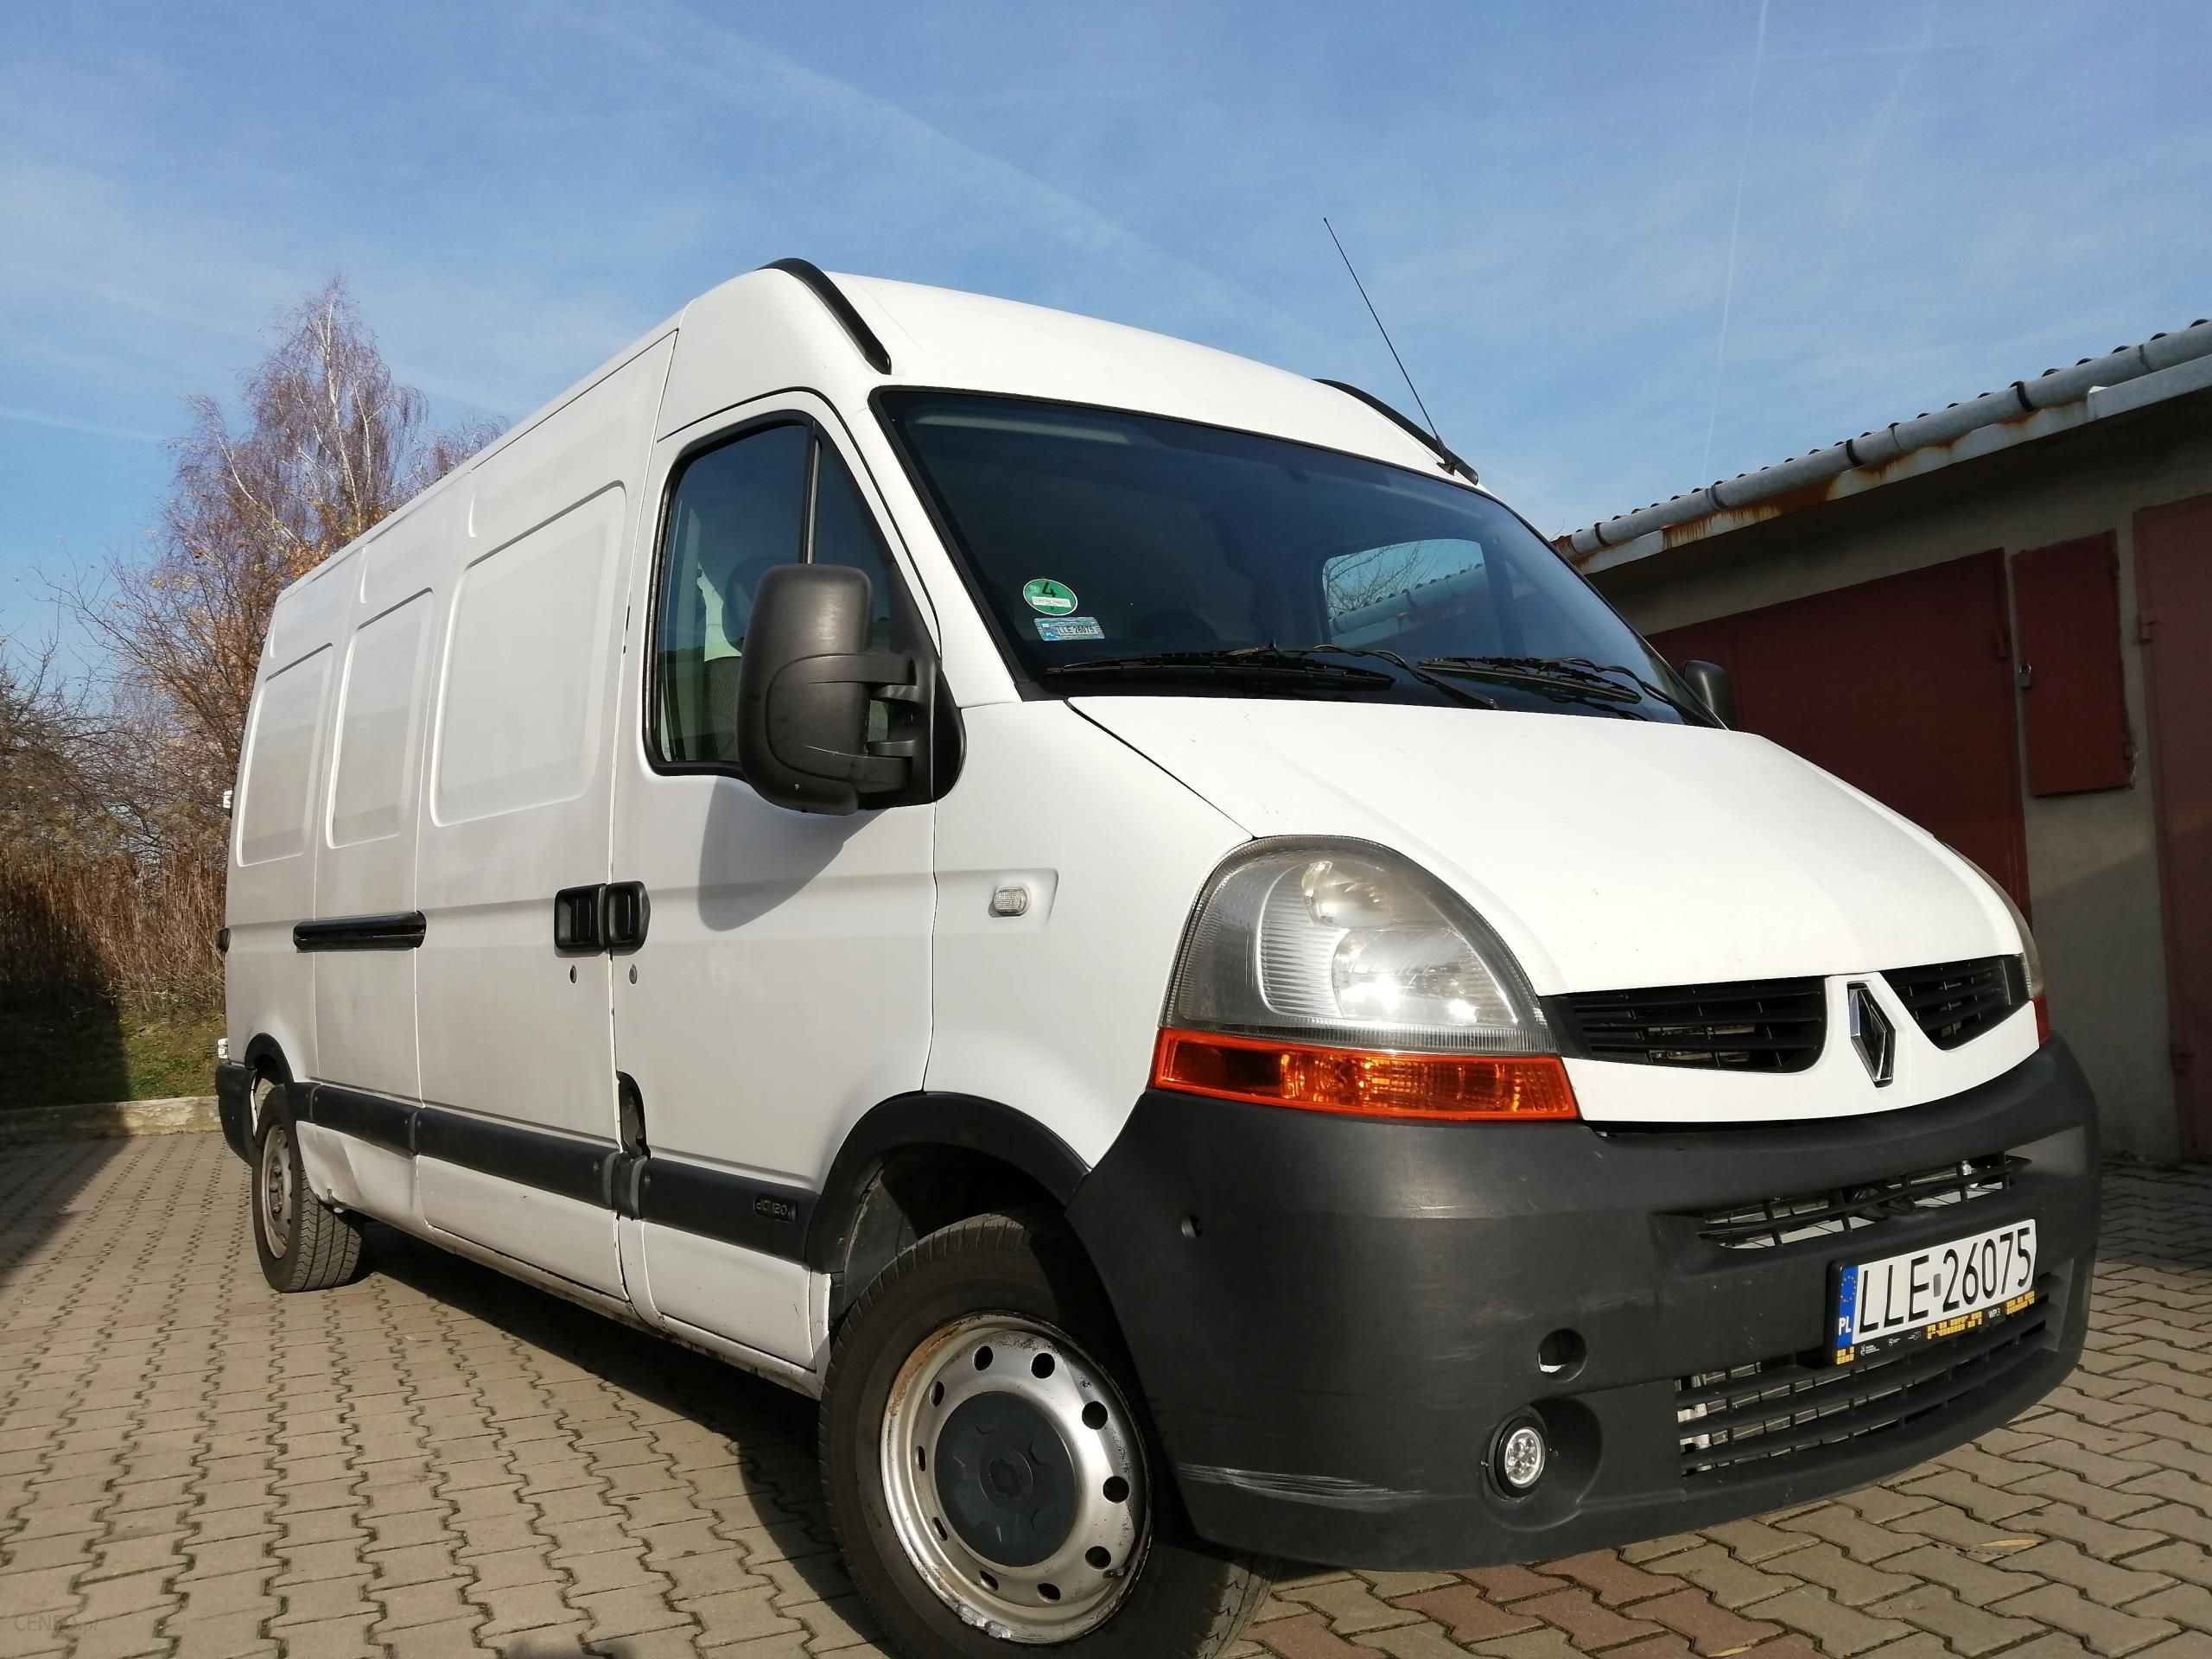 Renault MASTER L3H2 2,5 dci, 120 km, 2008R Opinie i ceny